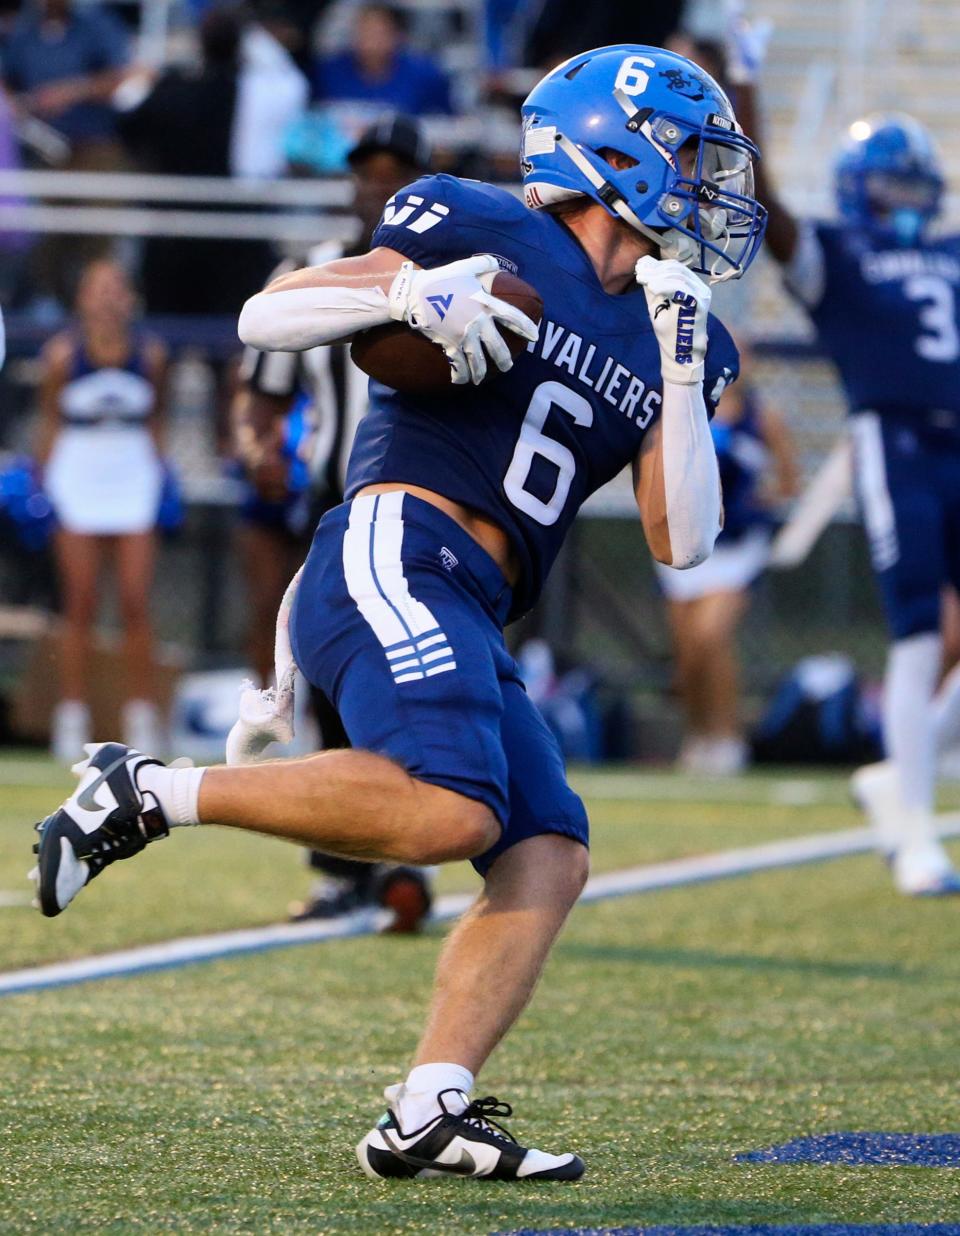 Middletown's Matt Priestley coasts into the end zone with a touchdown reception to open the scoring in the first half of the Cavaliers' 41-7 win against against Sussex Central at Cavaliers Stadium, Friday, Sept. 8, 2023.